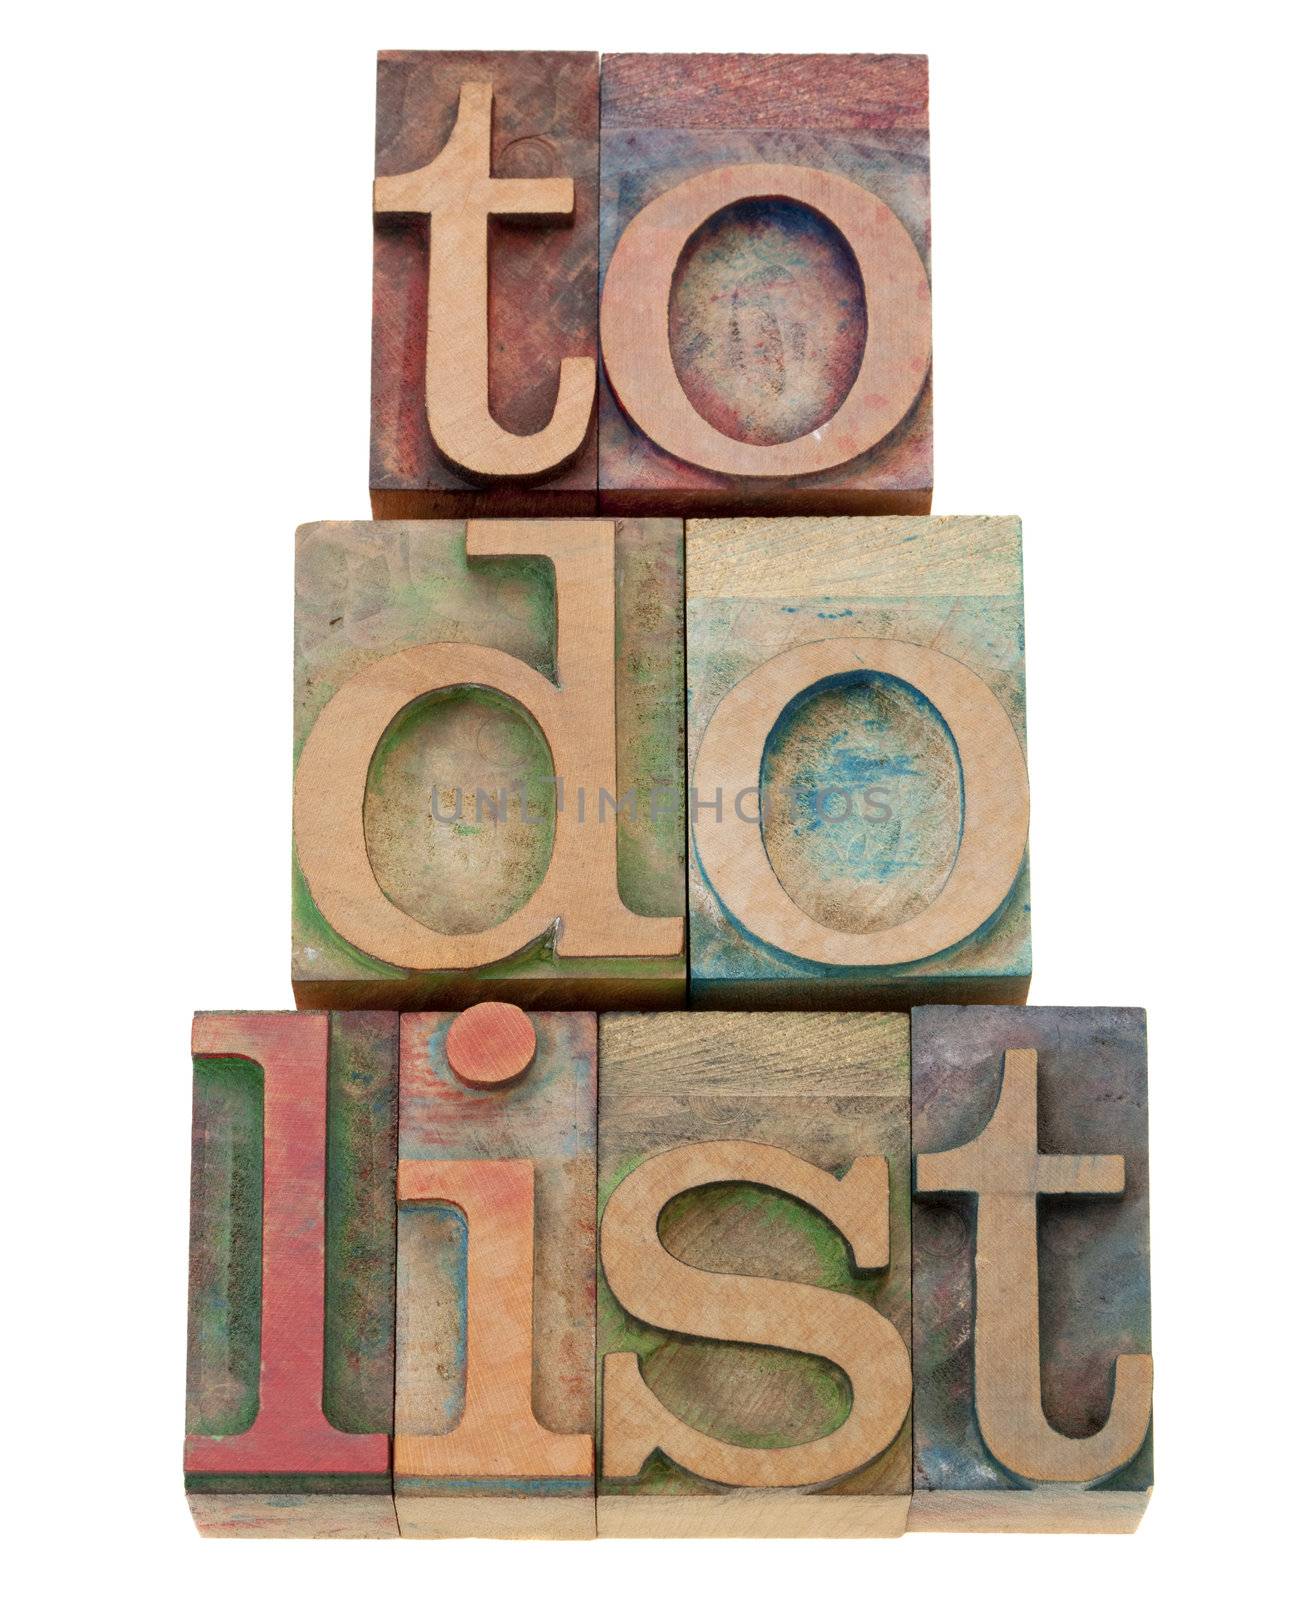 to do list - task management concept - isolated text in vintage wood letterpress printing blocks